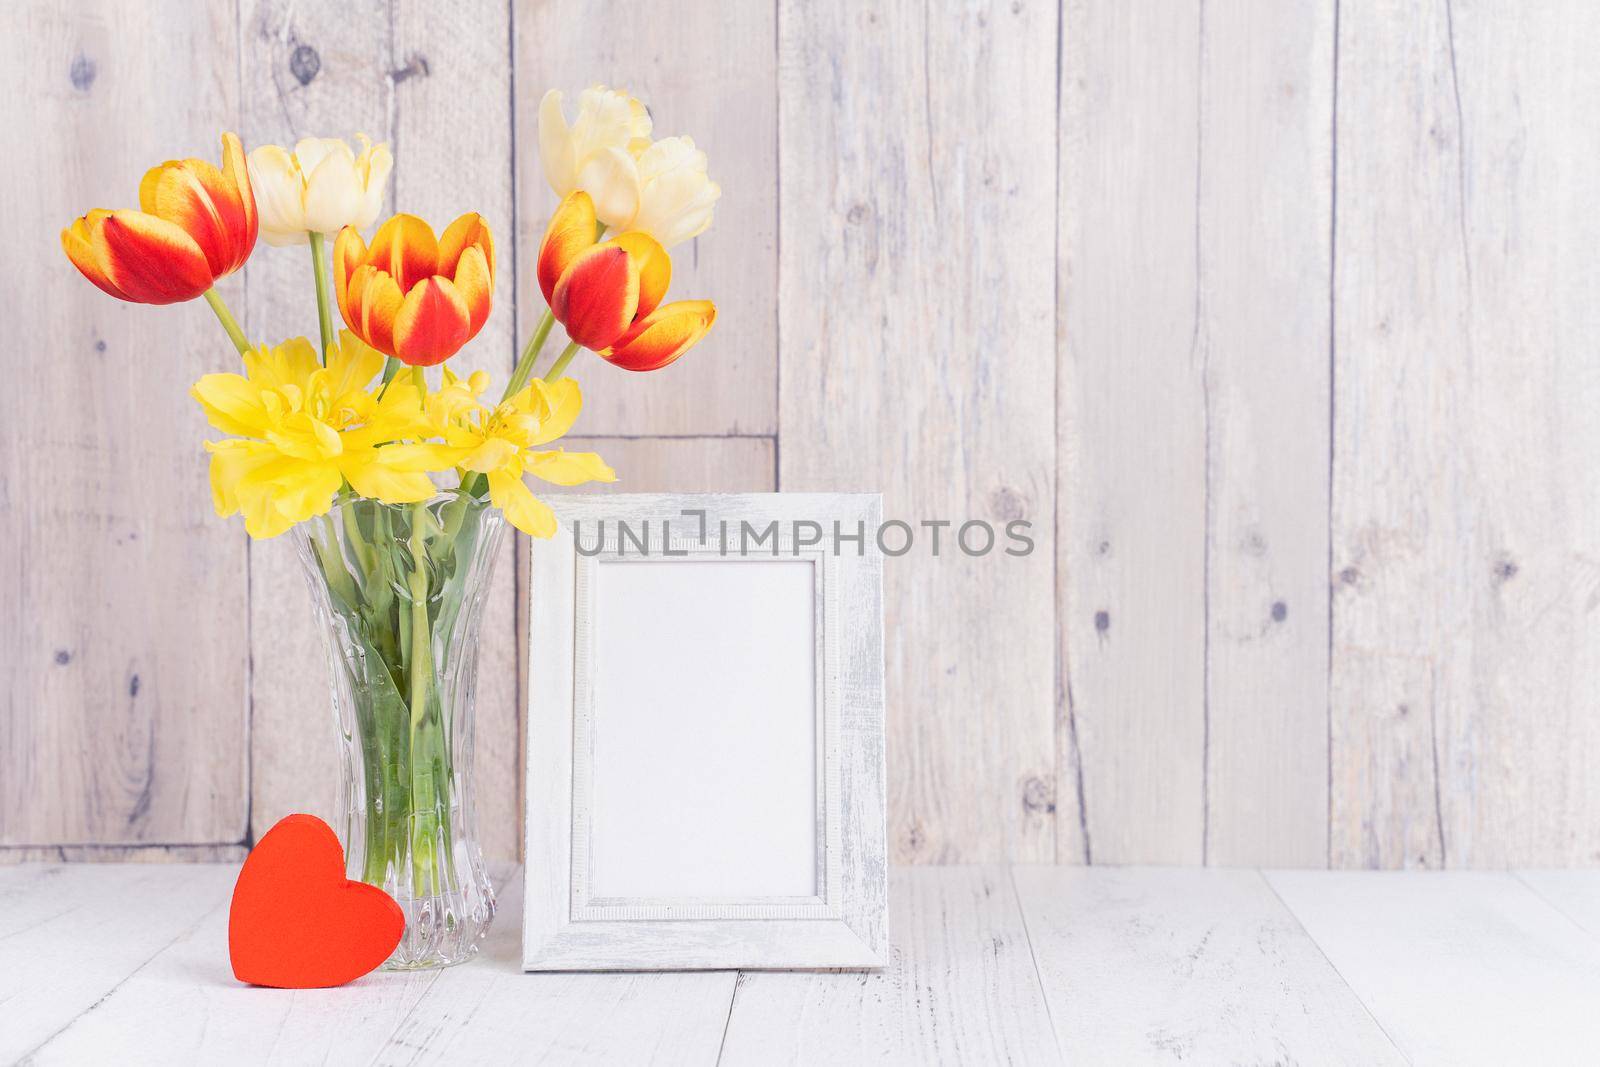 Tulip flower in glass vase with picture frame decor on wooden table background wall at home, close up, Mother's Day design concept. by ROMIXIMAGE